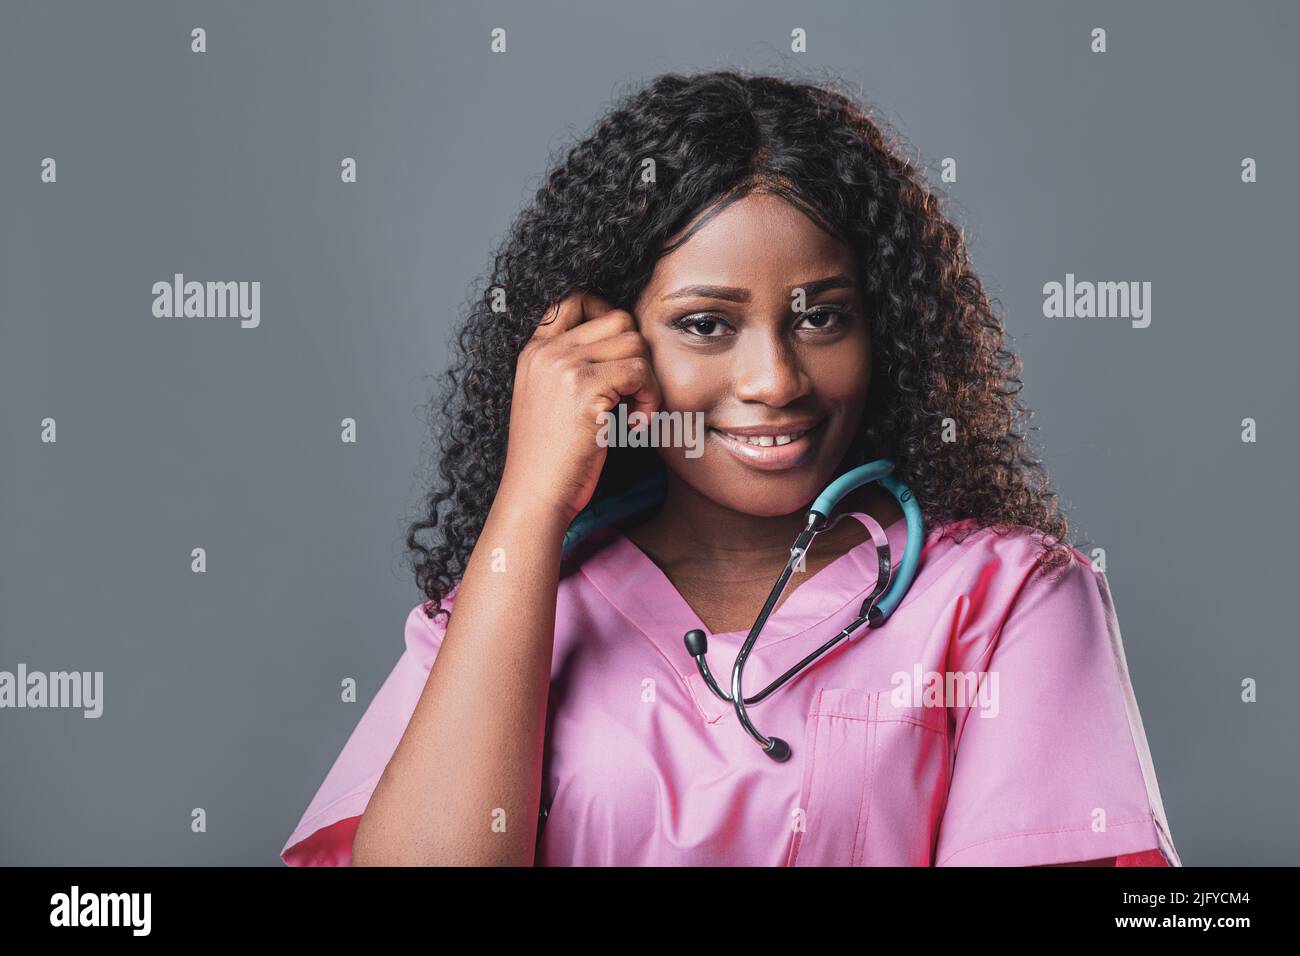 Young doctor black african woman smiling with stethoscope in pink uniform on gray background. Stock Photo